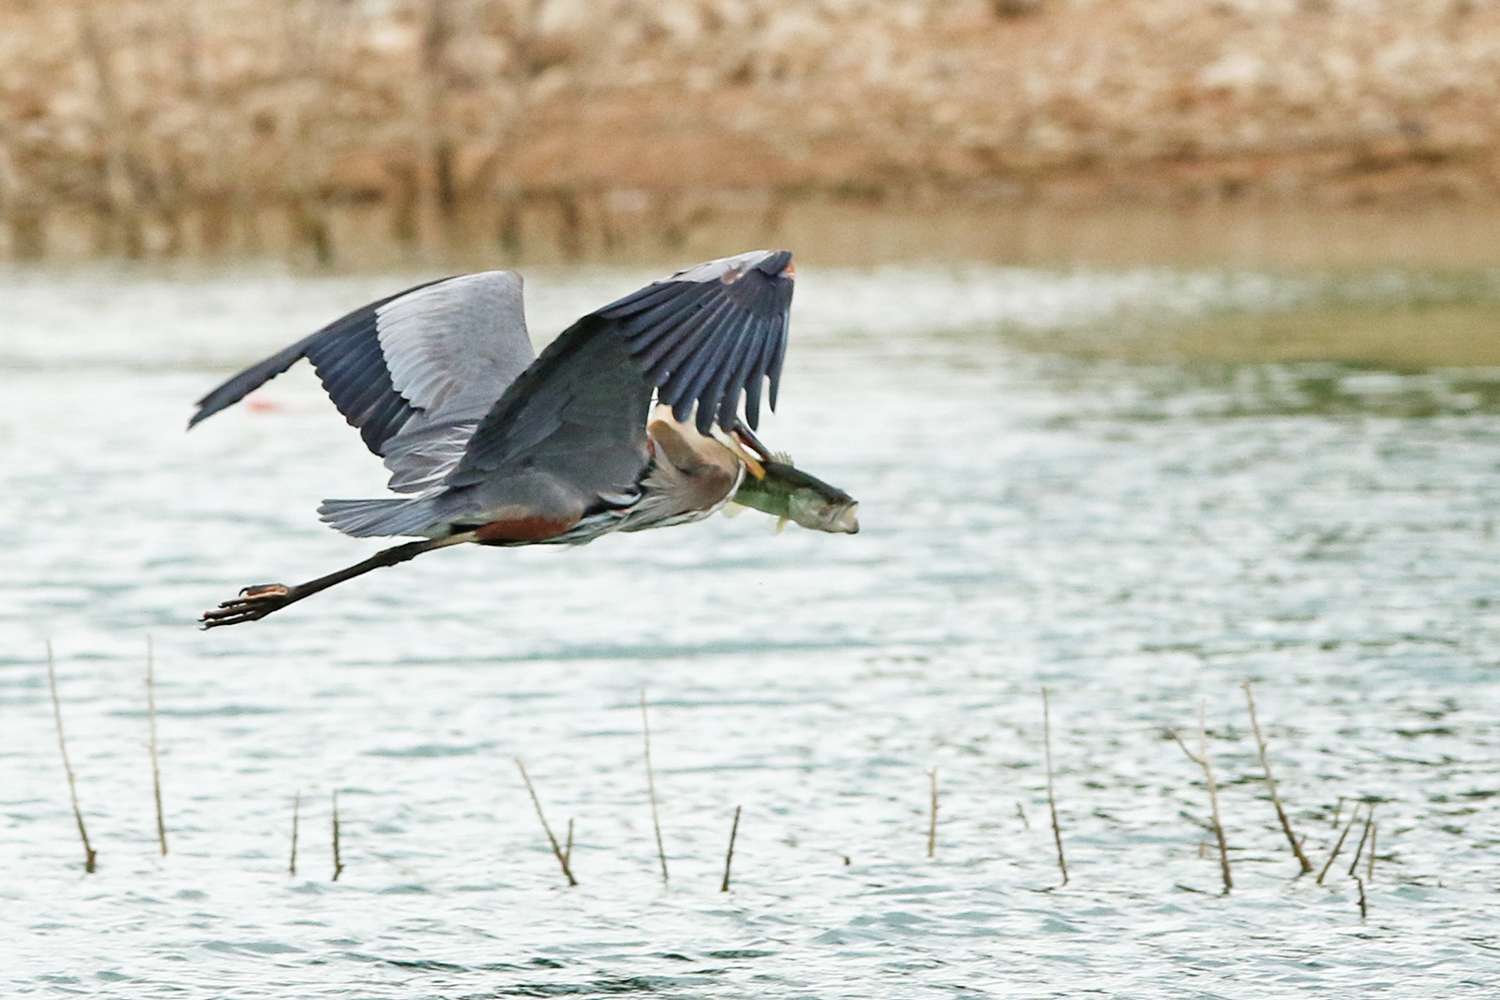 Great blue heron, Lake Travis, Texas Fest, 2018. He has his limit of bass skewered with his beak.